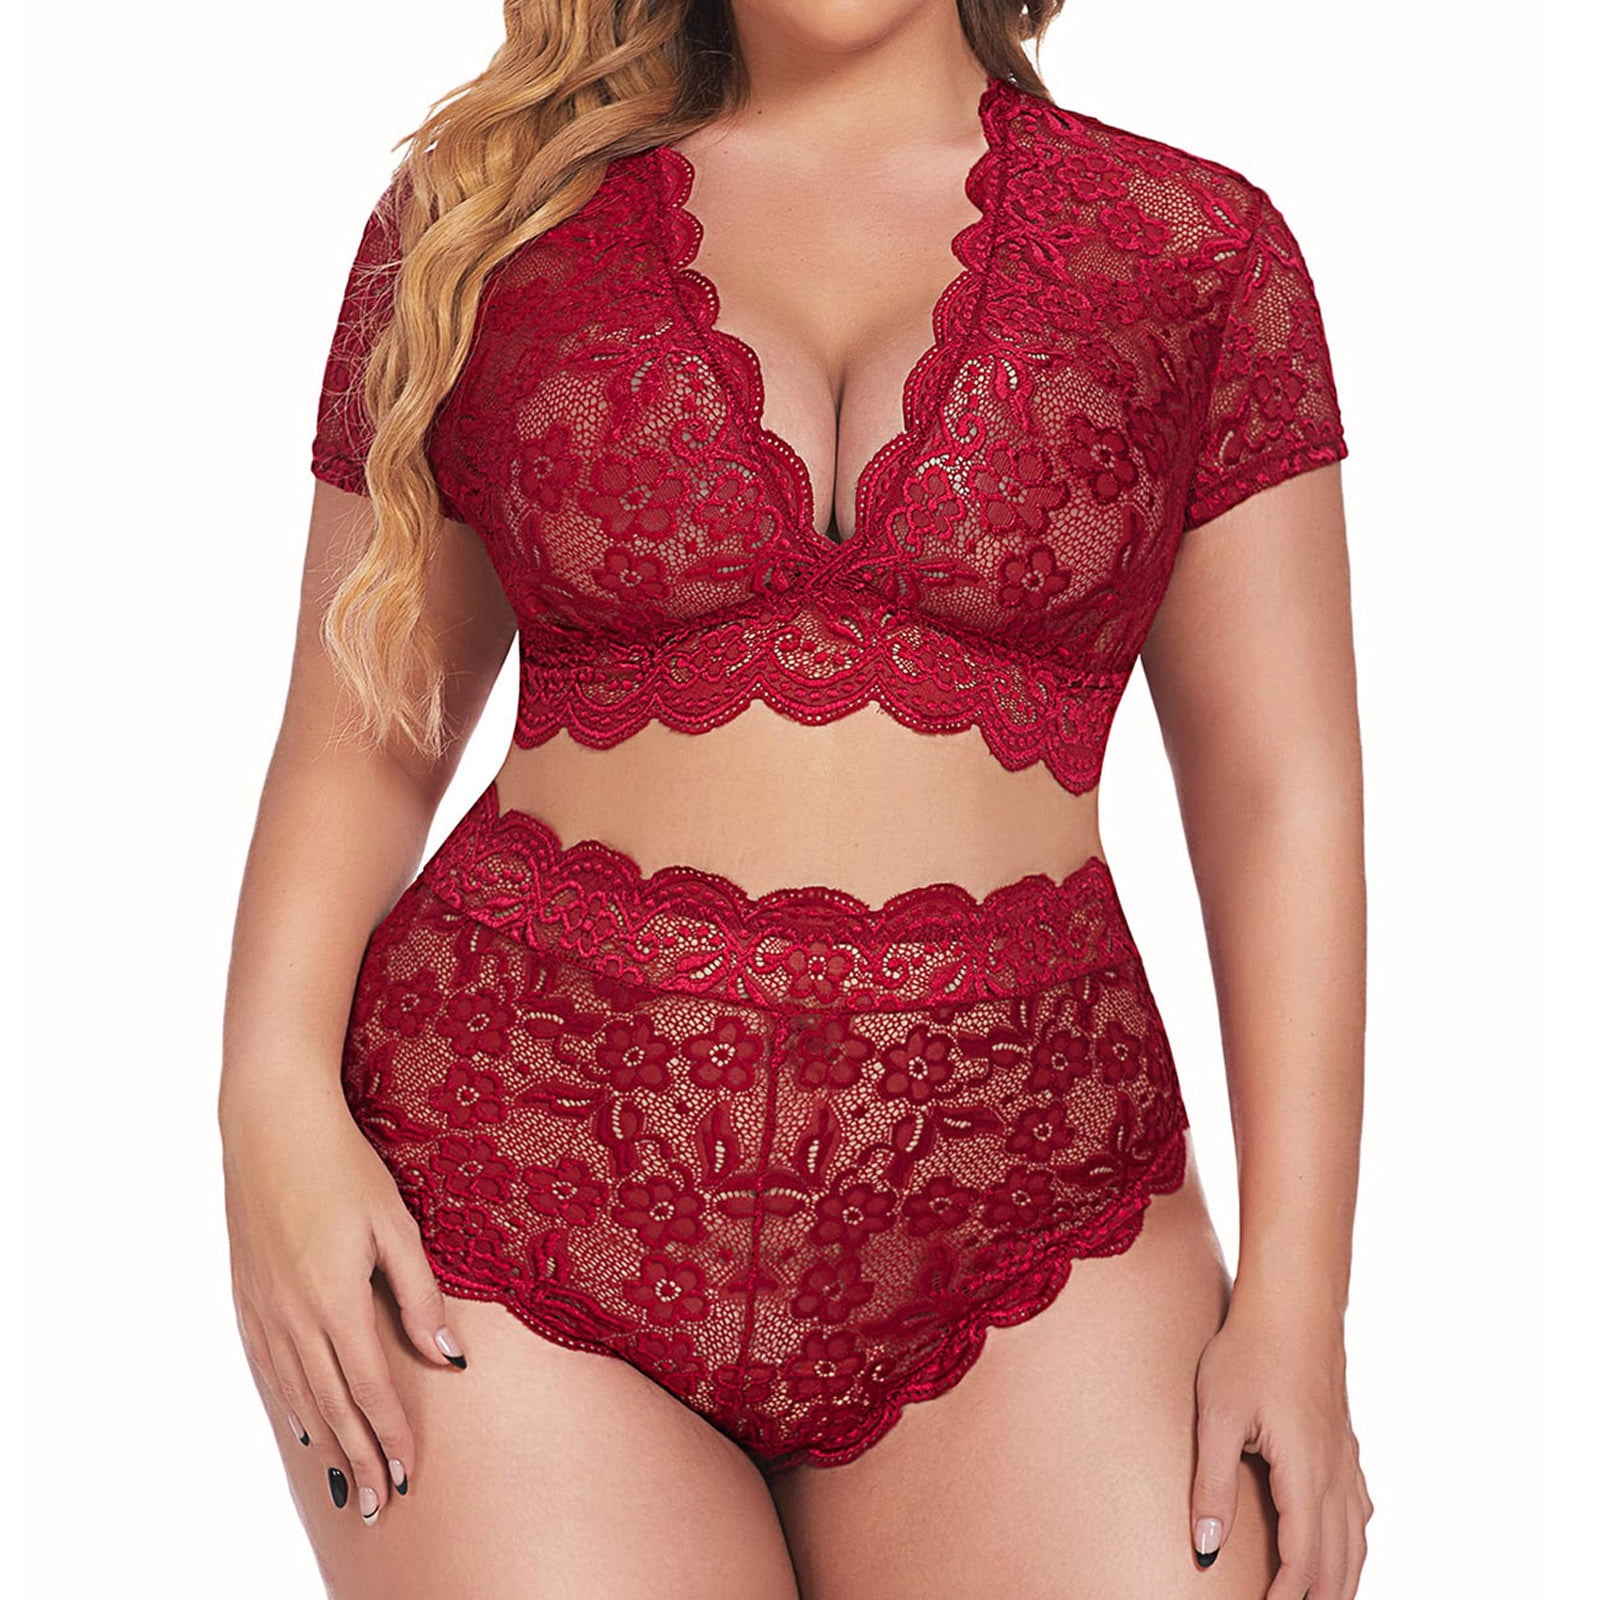 Gibobby Plus Size Lingerie For Women Naughty Lingerie for Women Deep V  Halter Lingerie Teddy One Piece Bodysuit Lace Underwear for Sex Play 